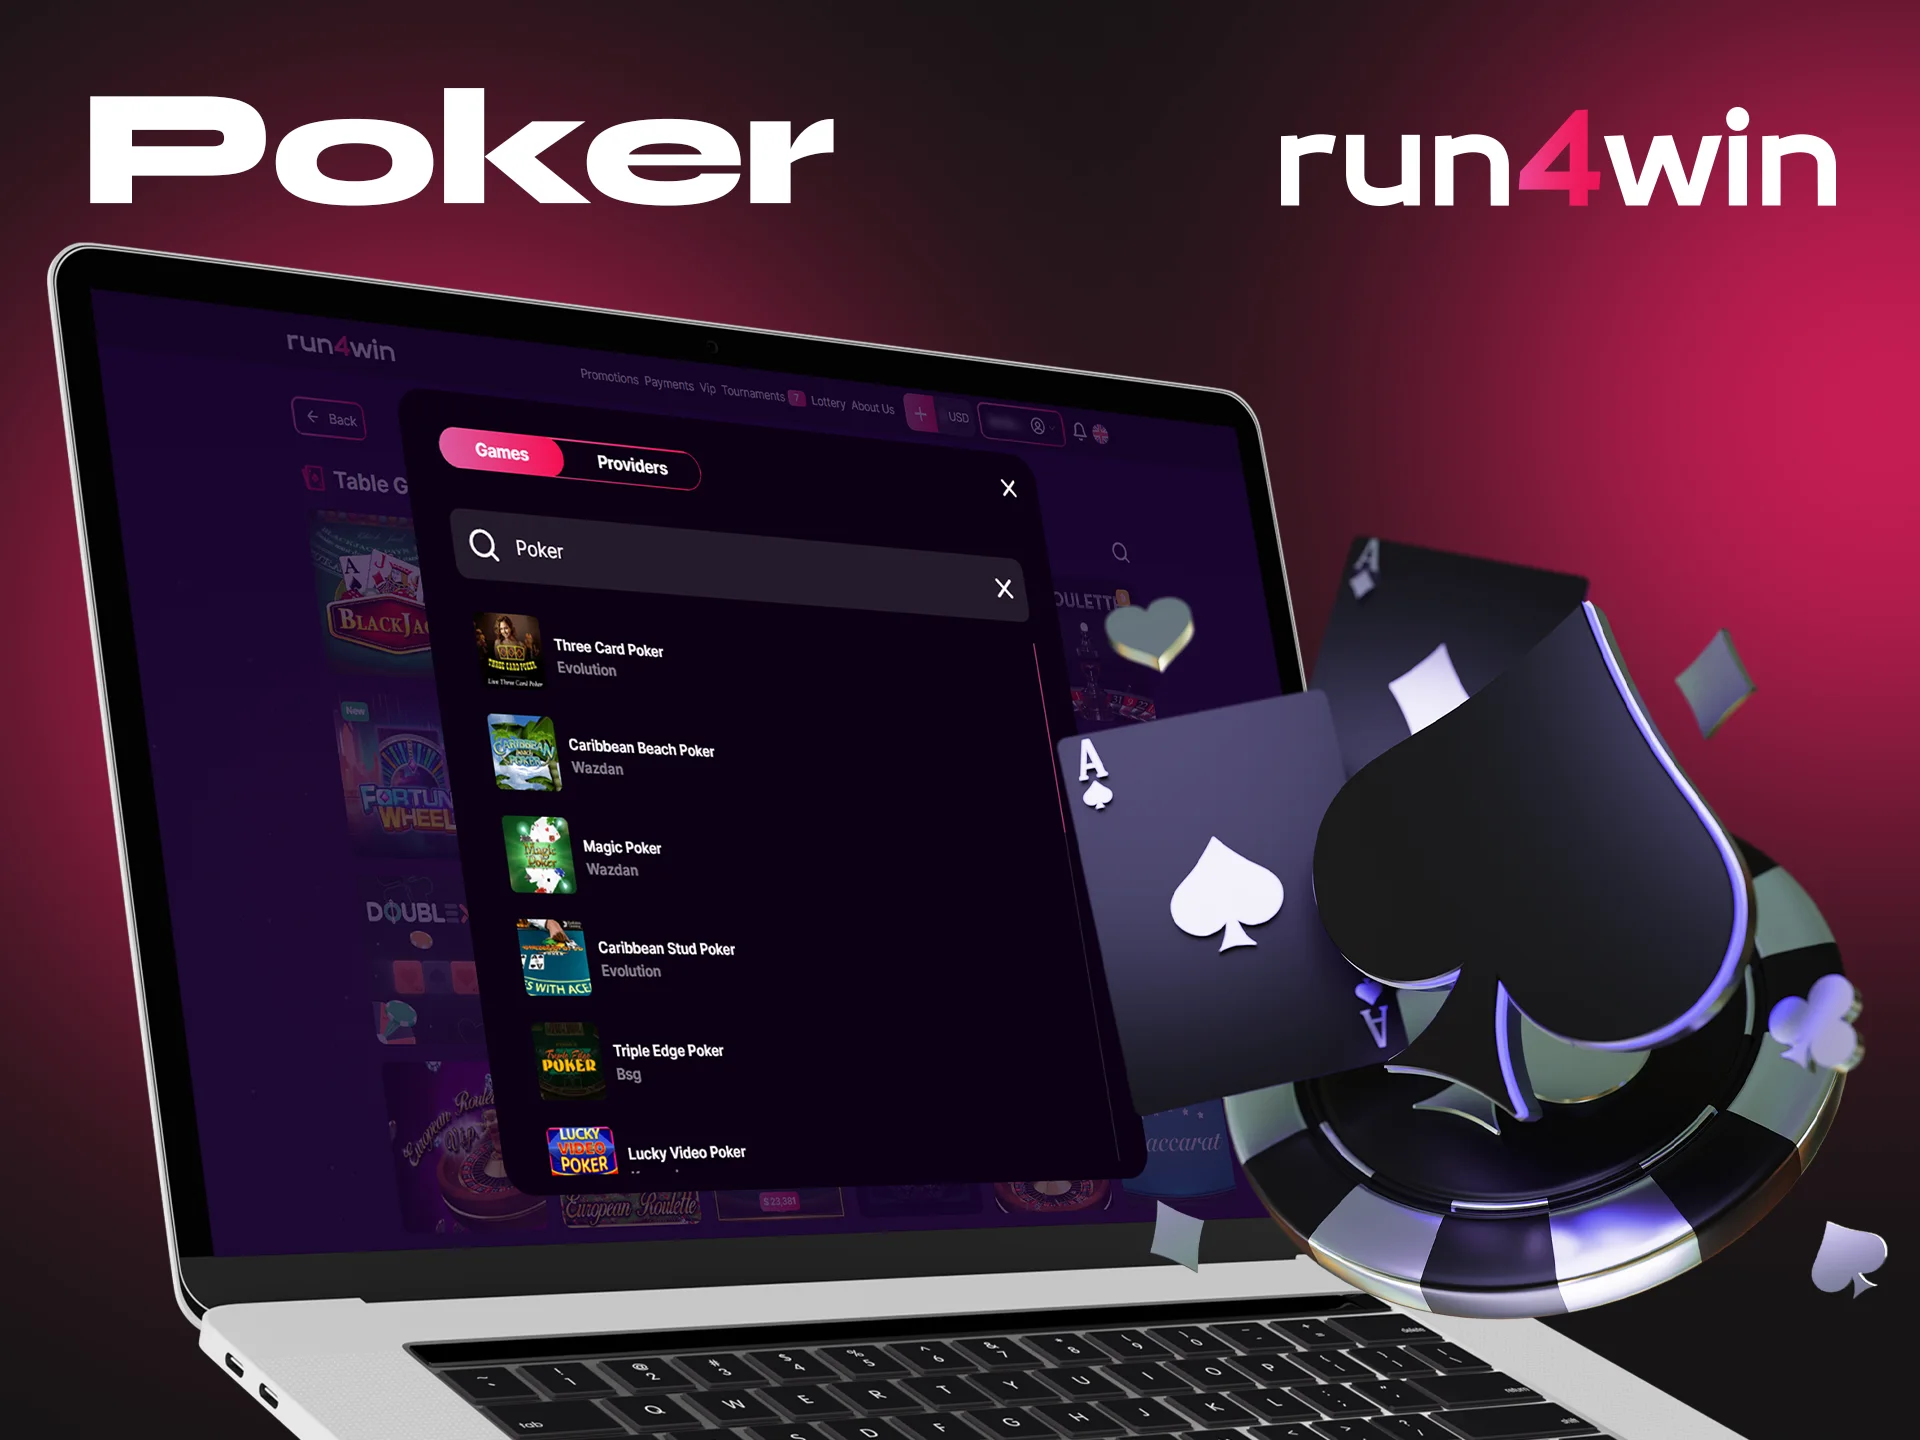 Run4Win Casino offers many types of poker games.